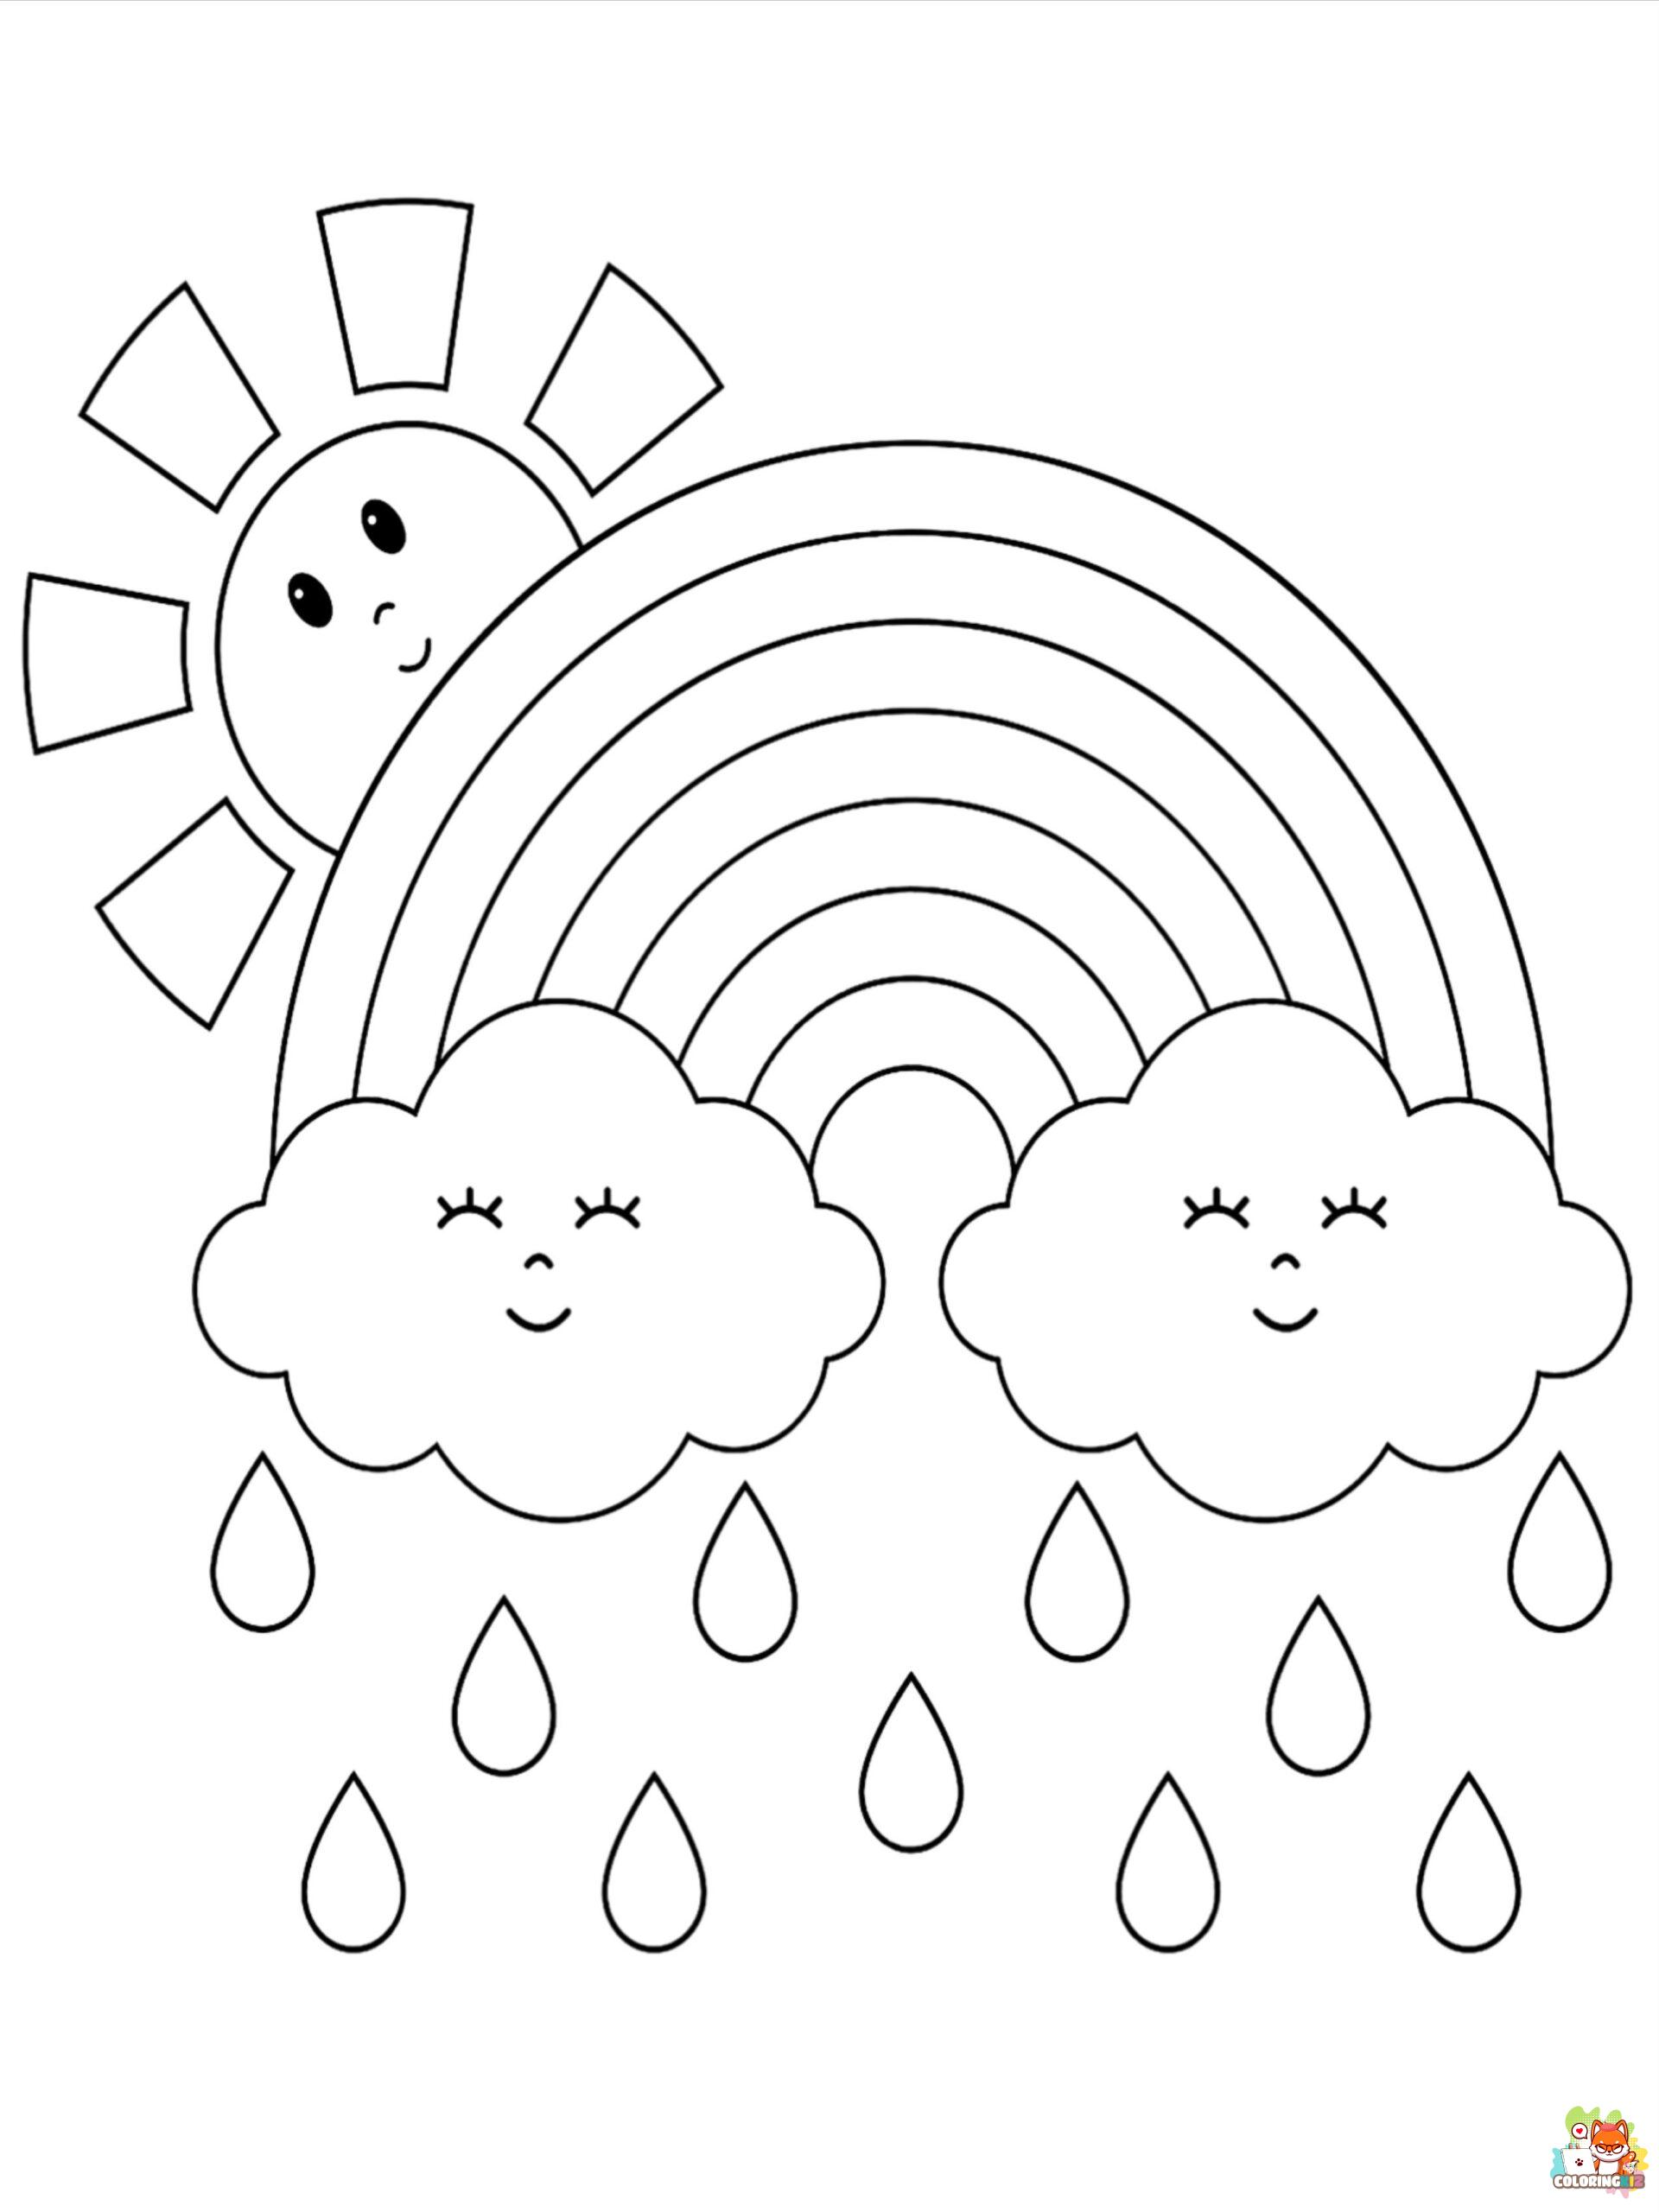 Free weather coloring pages for kids